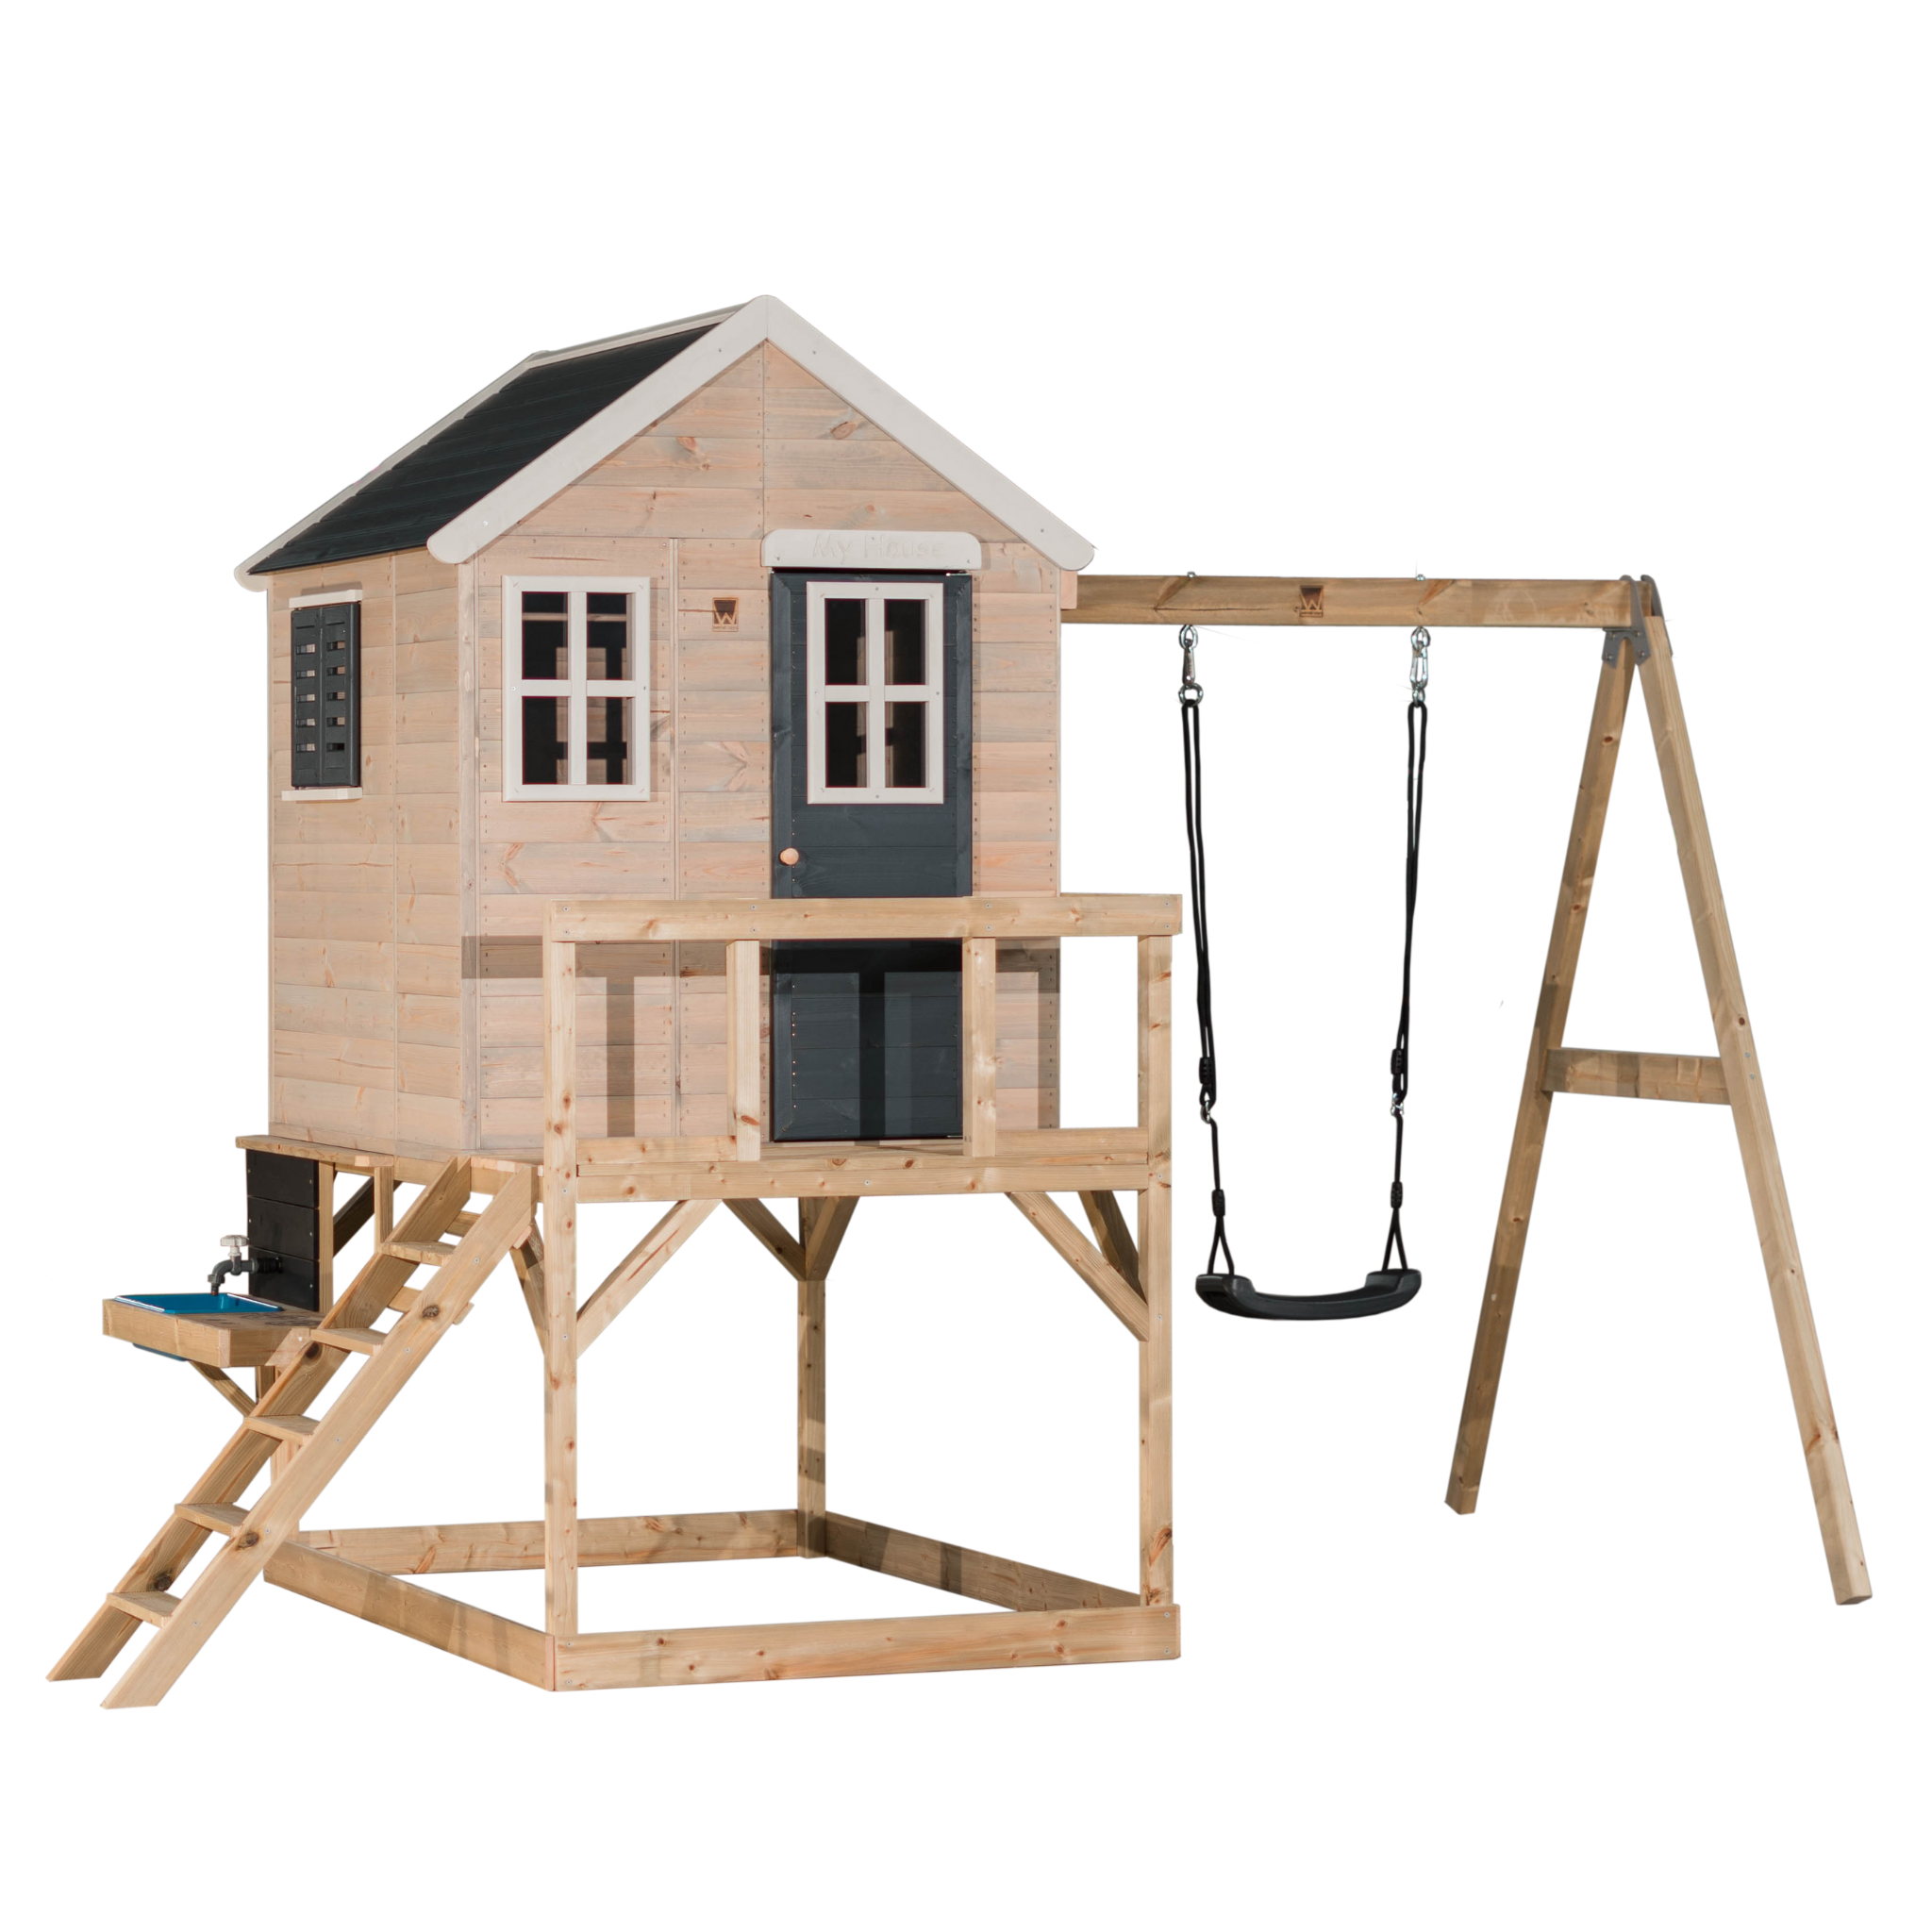 M23-K My Lodge with Platform and Single Swing + Kitchen Attachment